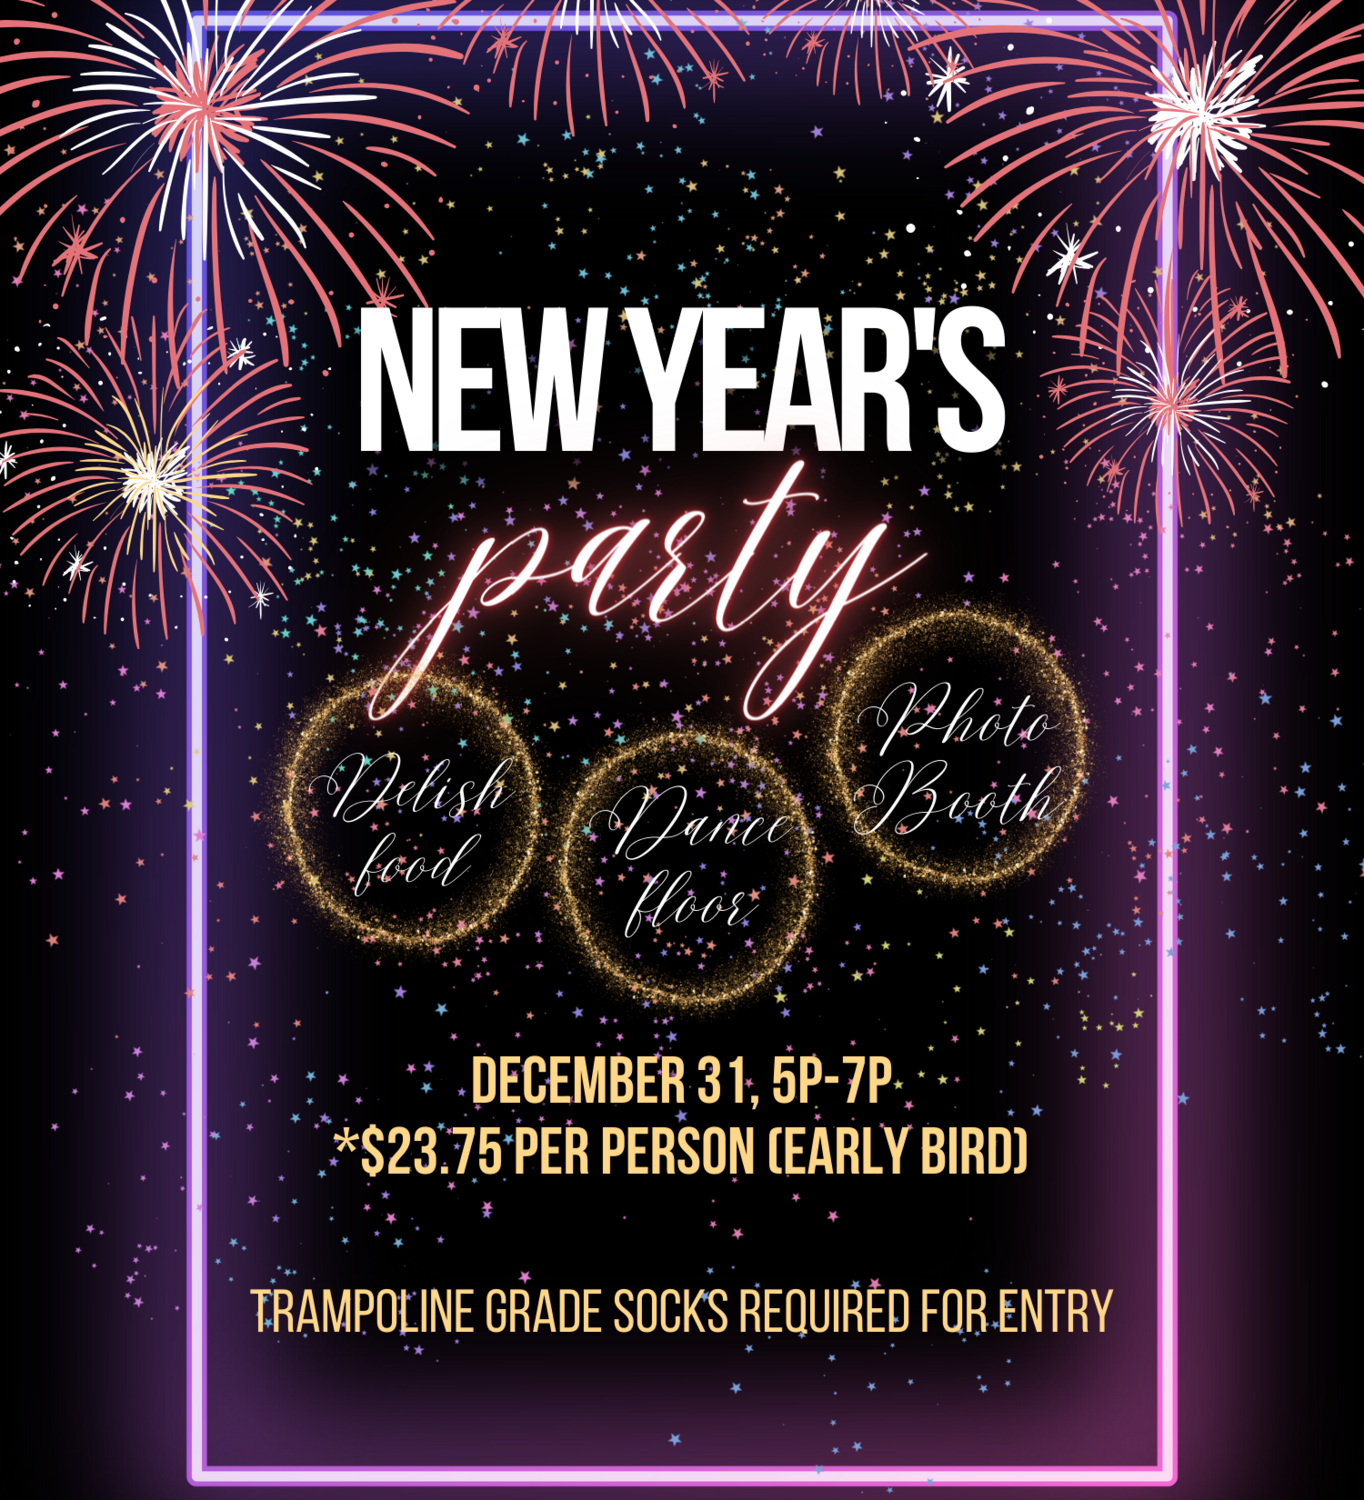 New Year's Eve Party @ Swings & Wings